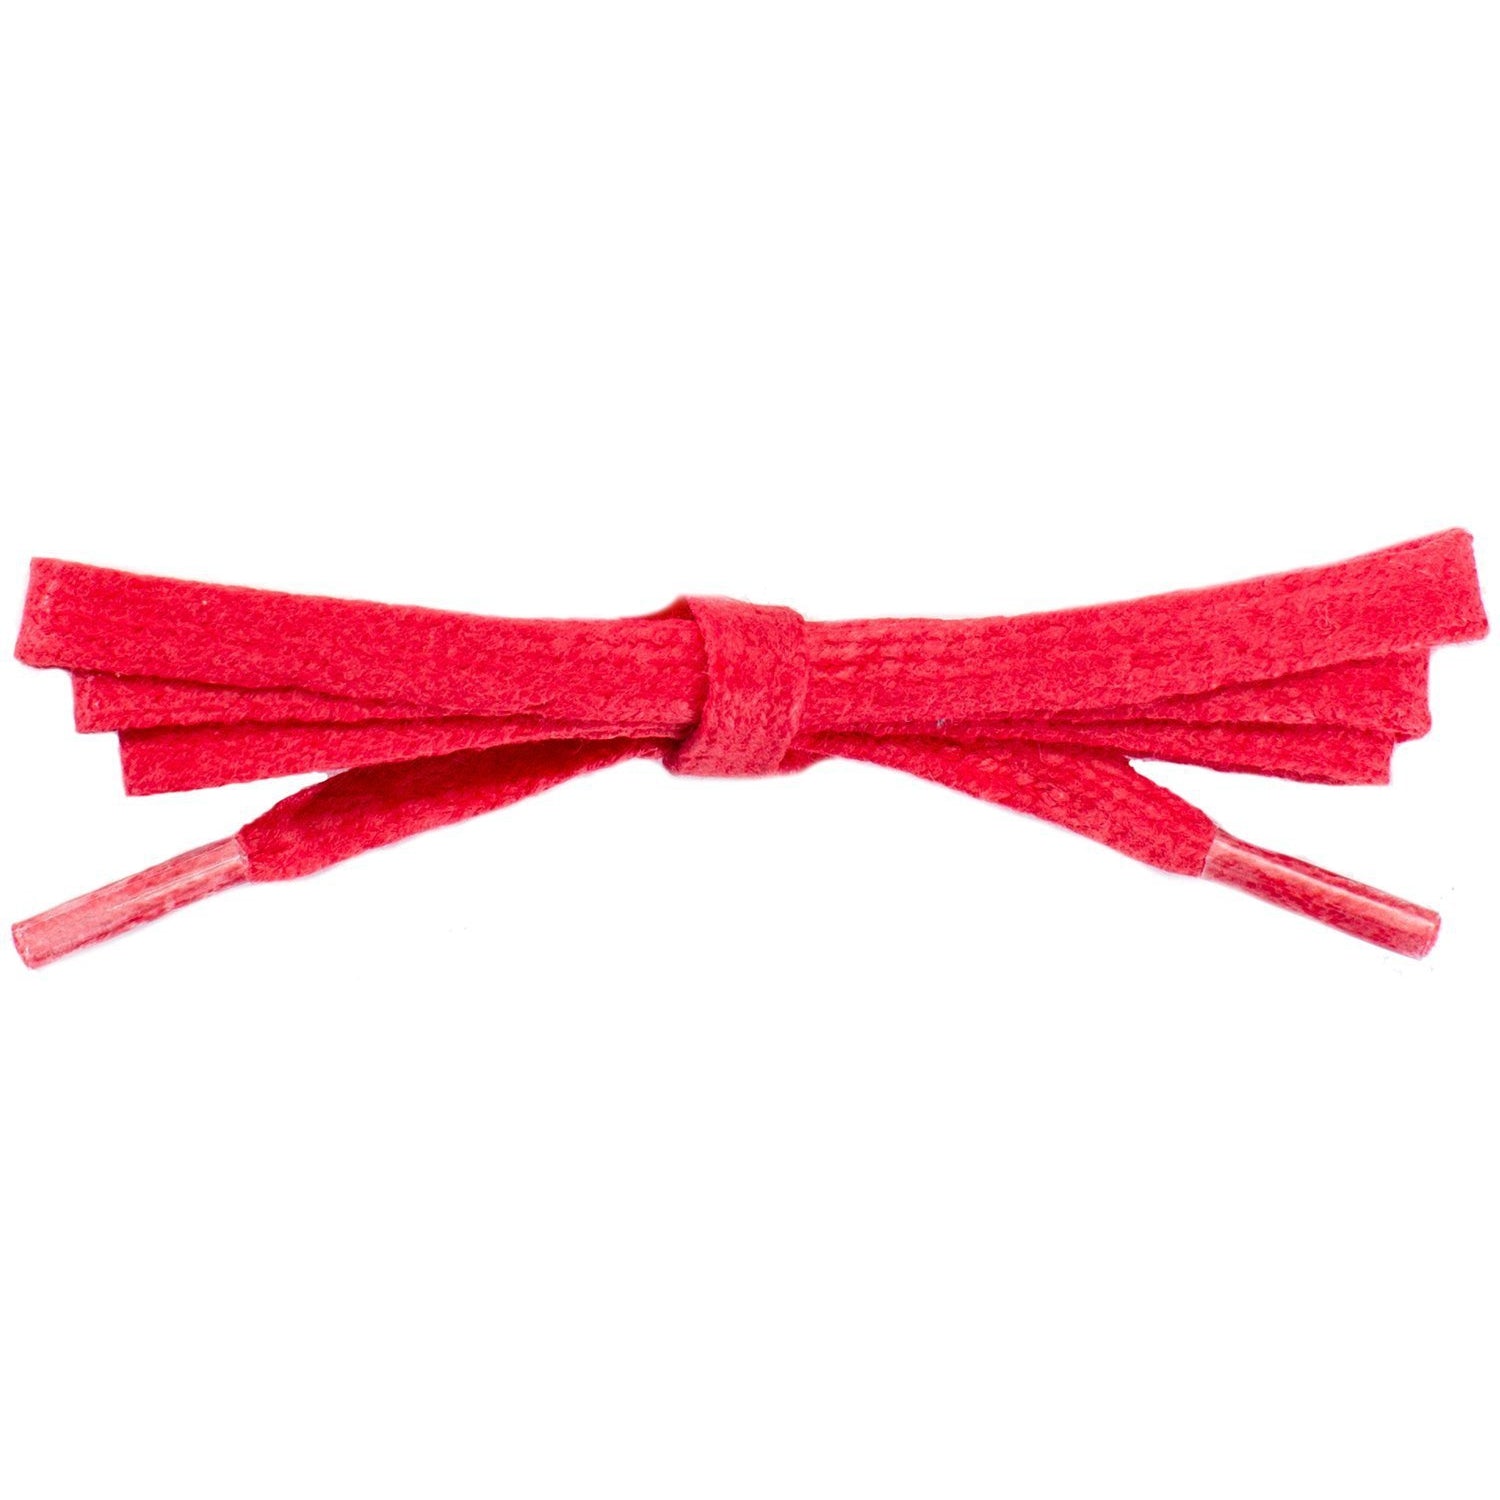 Wholesale Waxed Cotton Flat DRESS Laces 1/4'' - Red (12 Pair Pack) Shoelaces